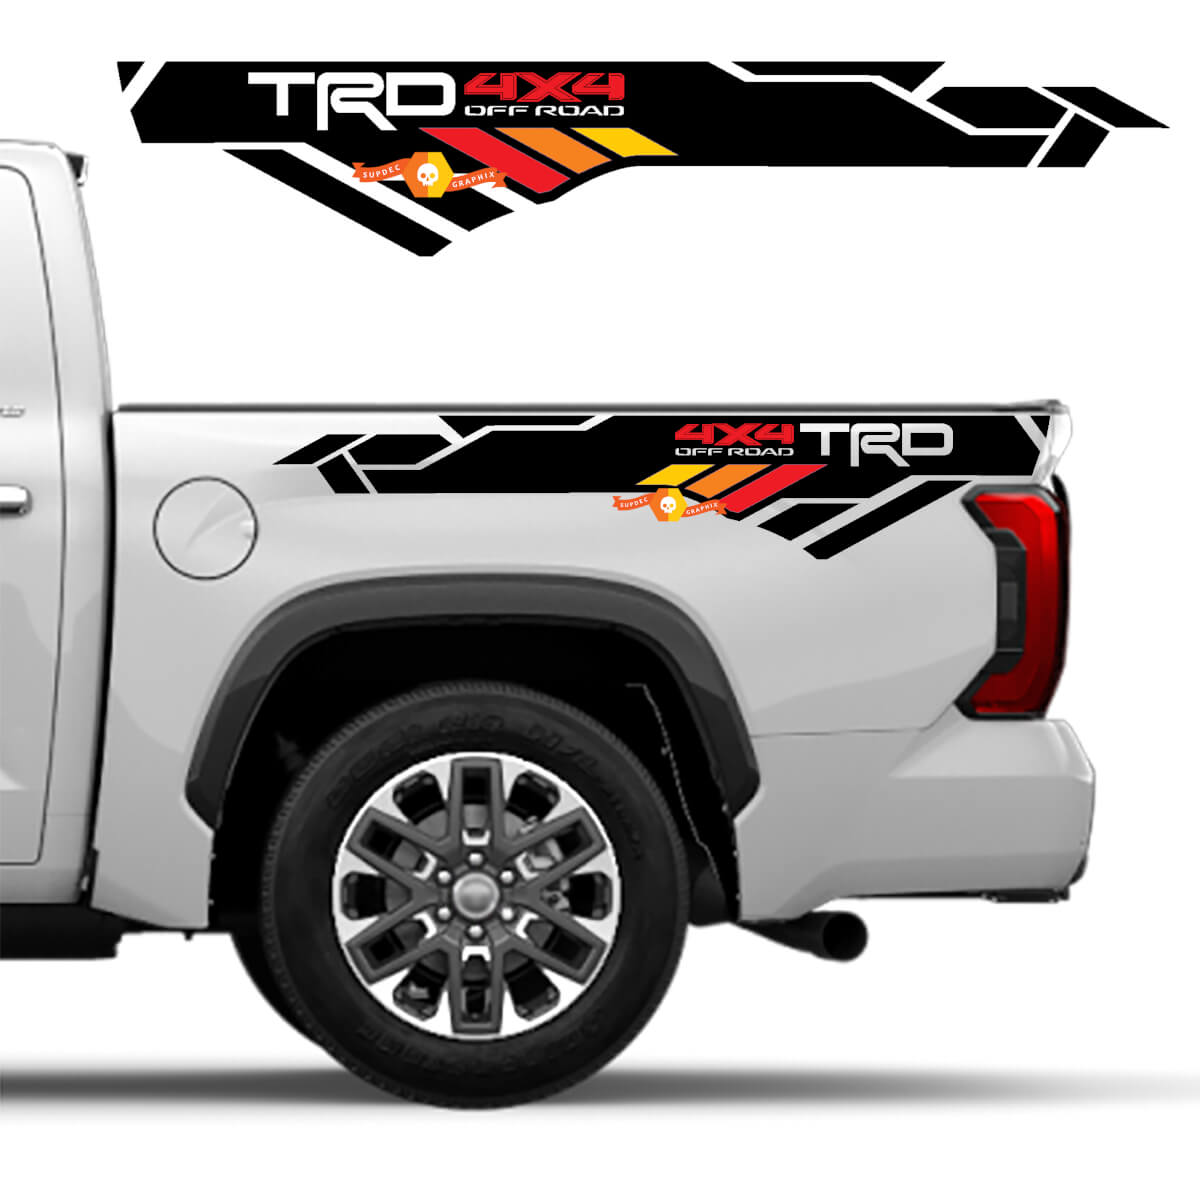 TRD 4x4 Off Road Vintage Colors BedSide Side Vinyl Stickers Decal fit to Toyota Tundra 2022 2023 2024
